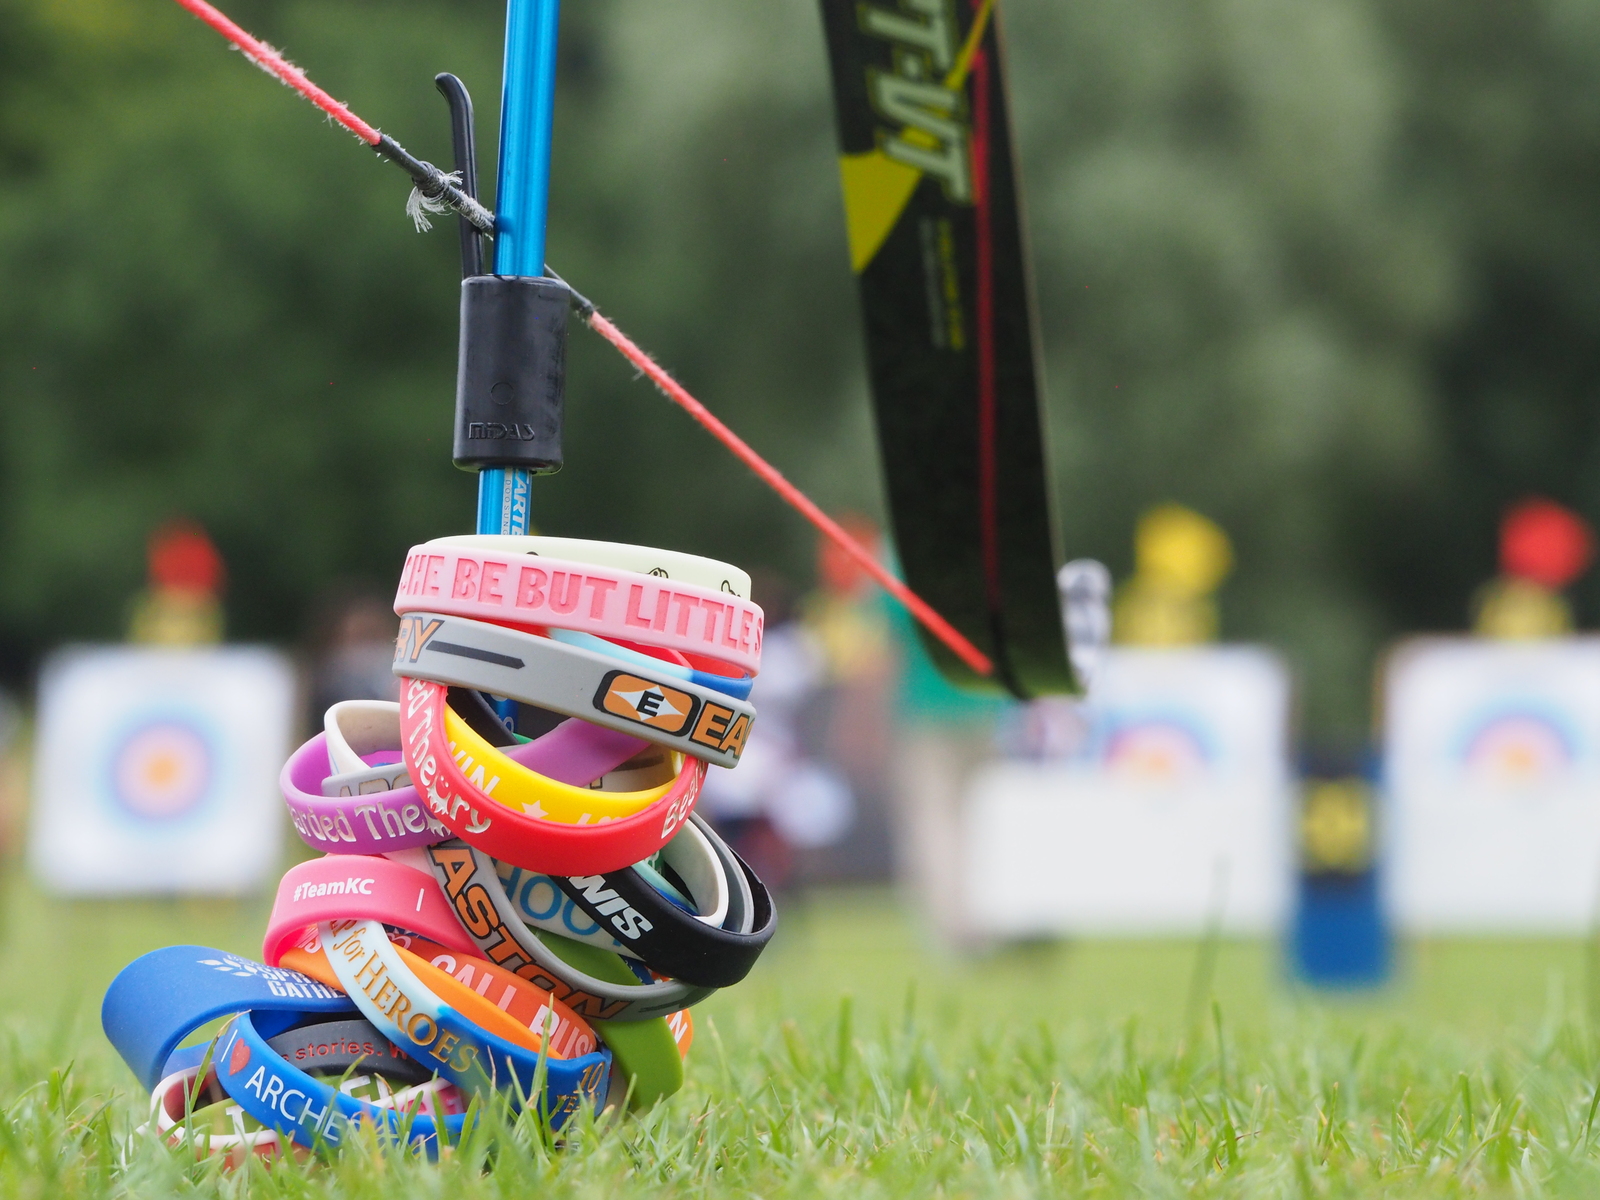 Wristbands on the ground on a range